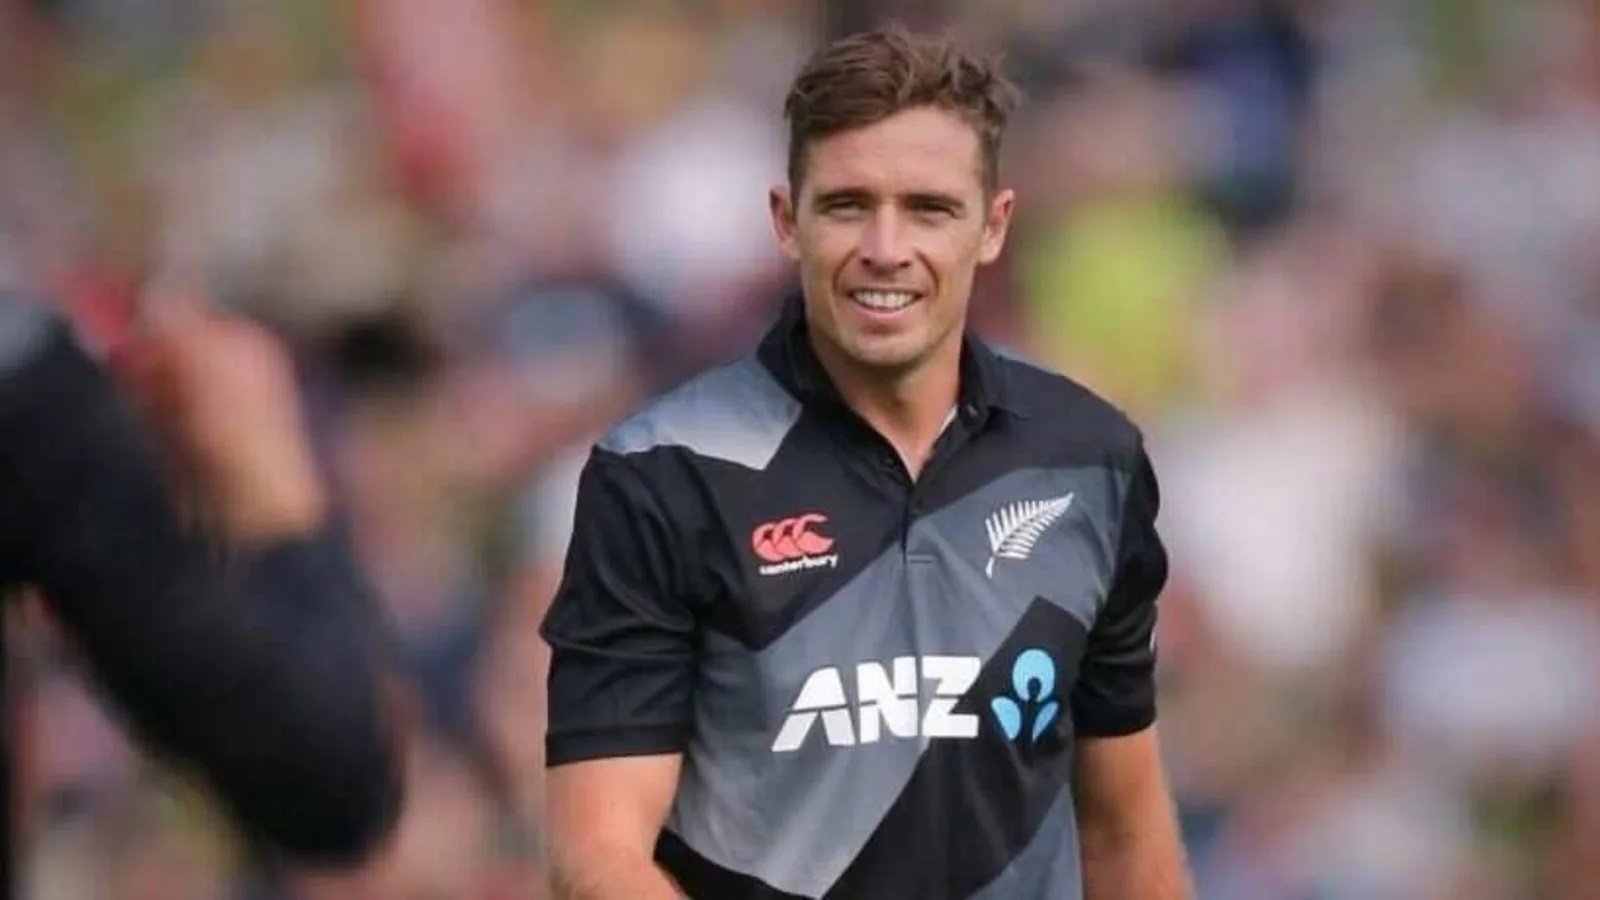 Tim Southee, New Zealand Bowler, T20 World Cup 2021